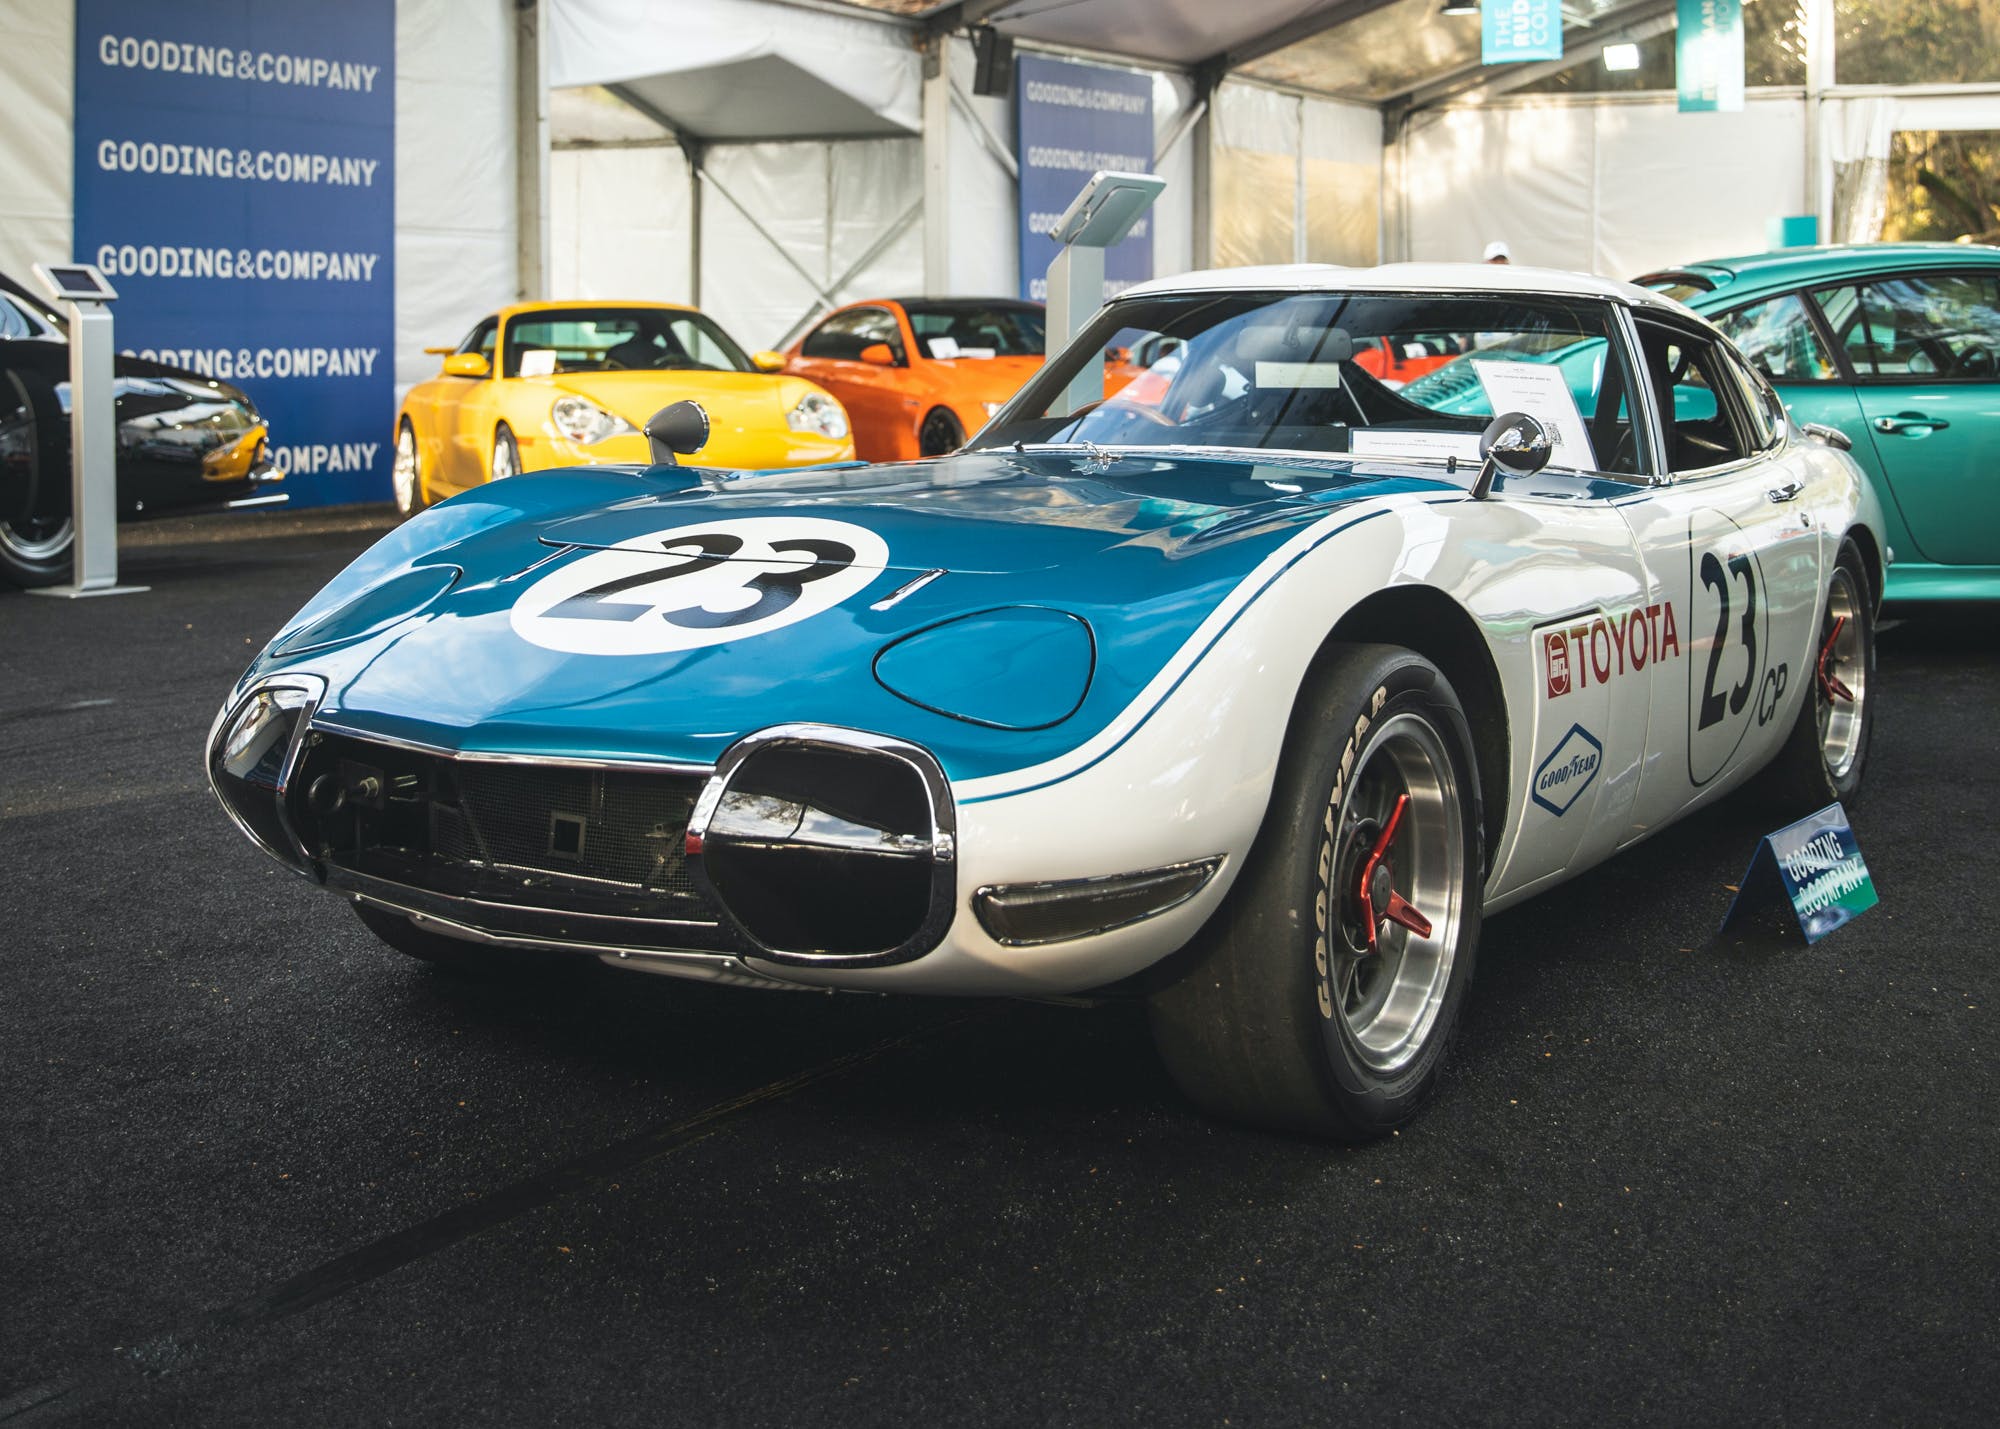 Shelby-tuned Toyota 2000GT sets an auction record for Japanese cars